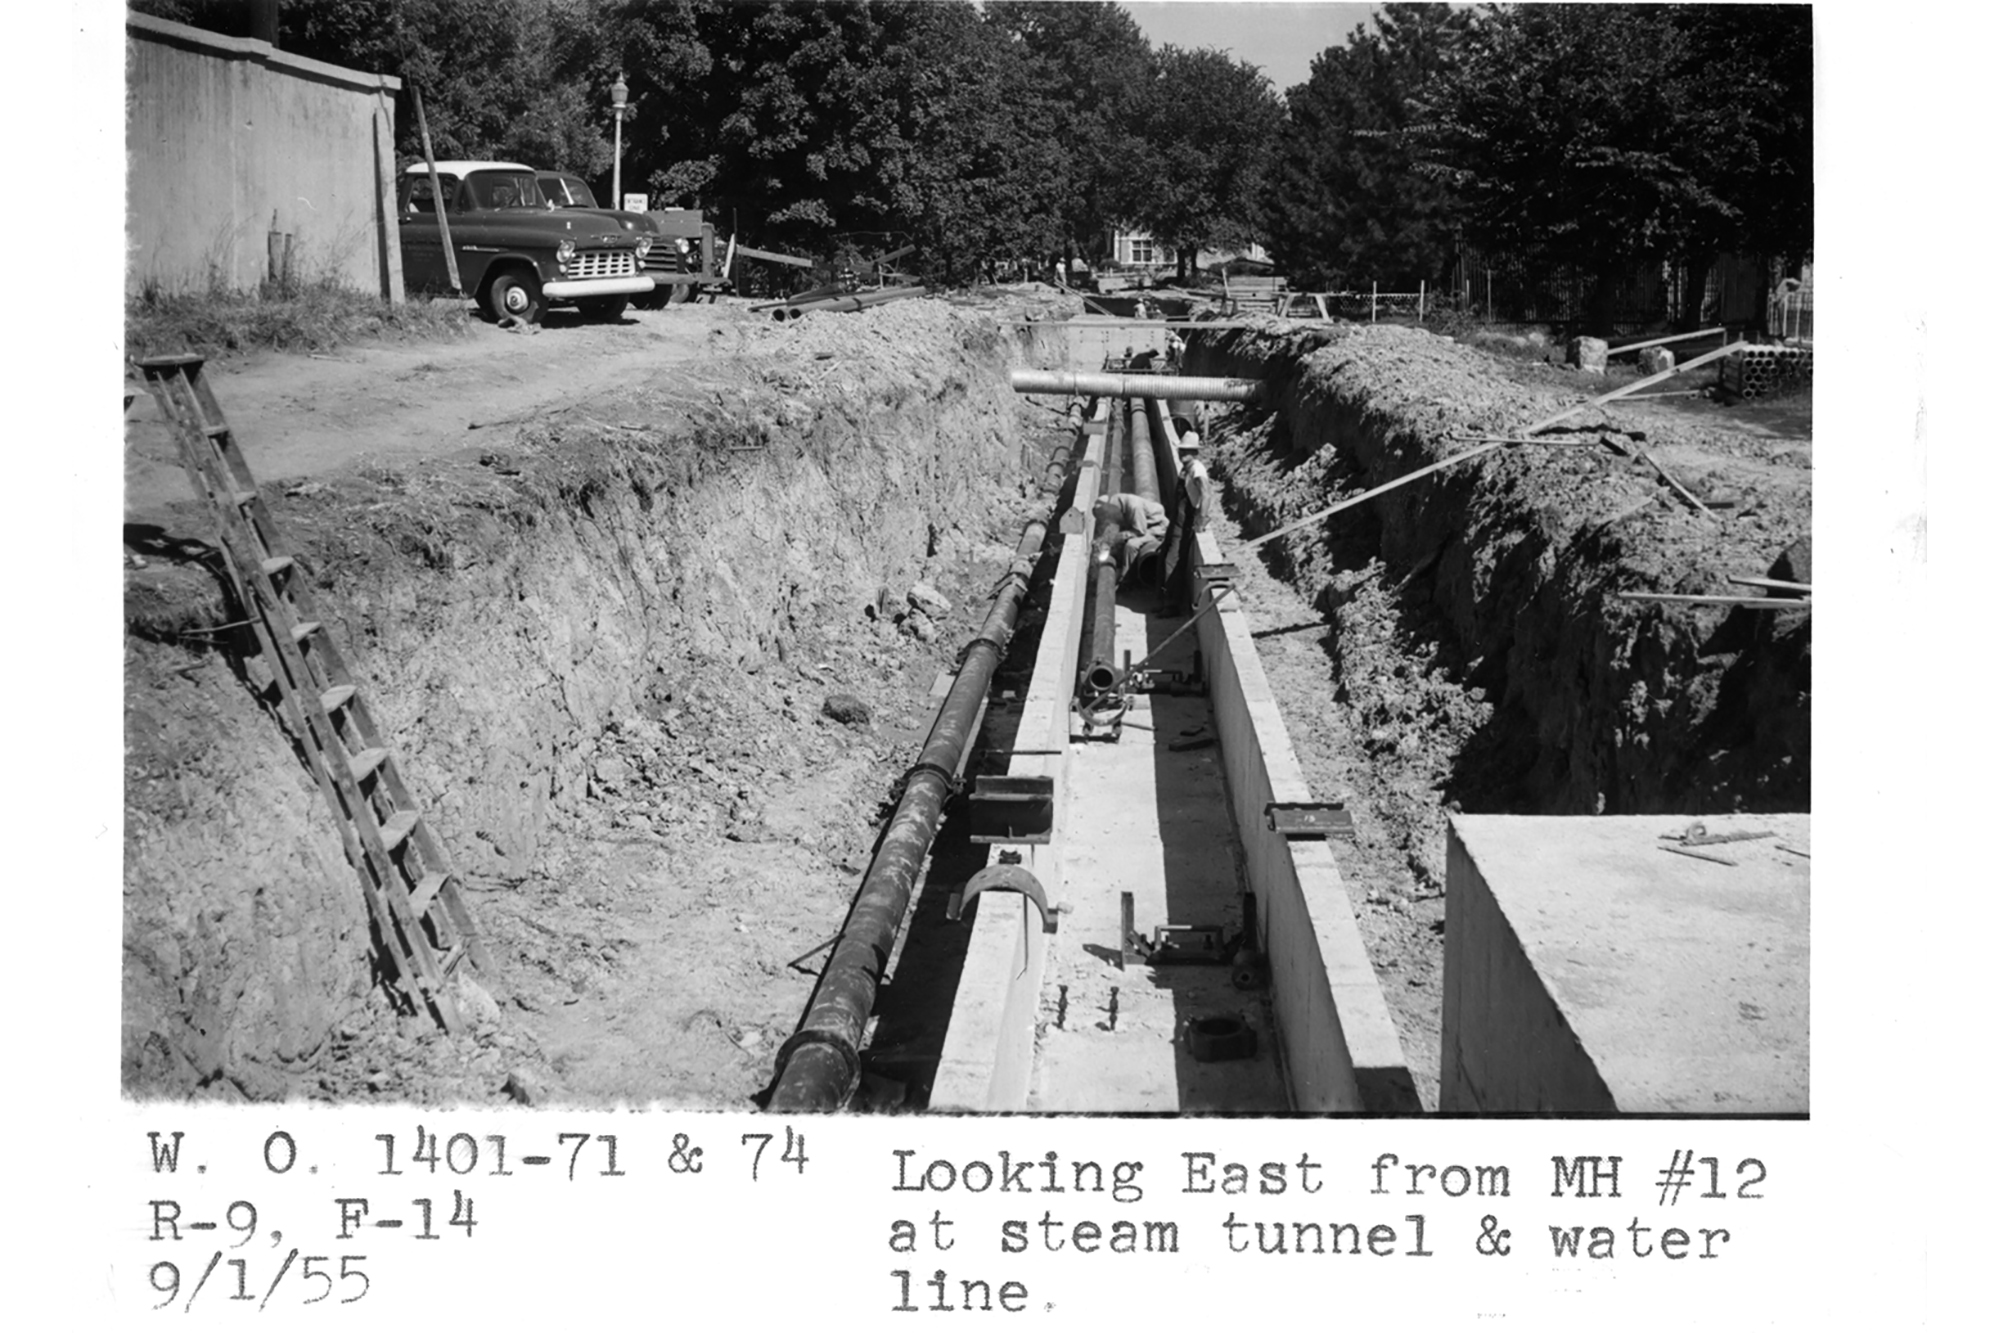 Looking East from MH #12 at steam tunnel and water line